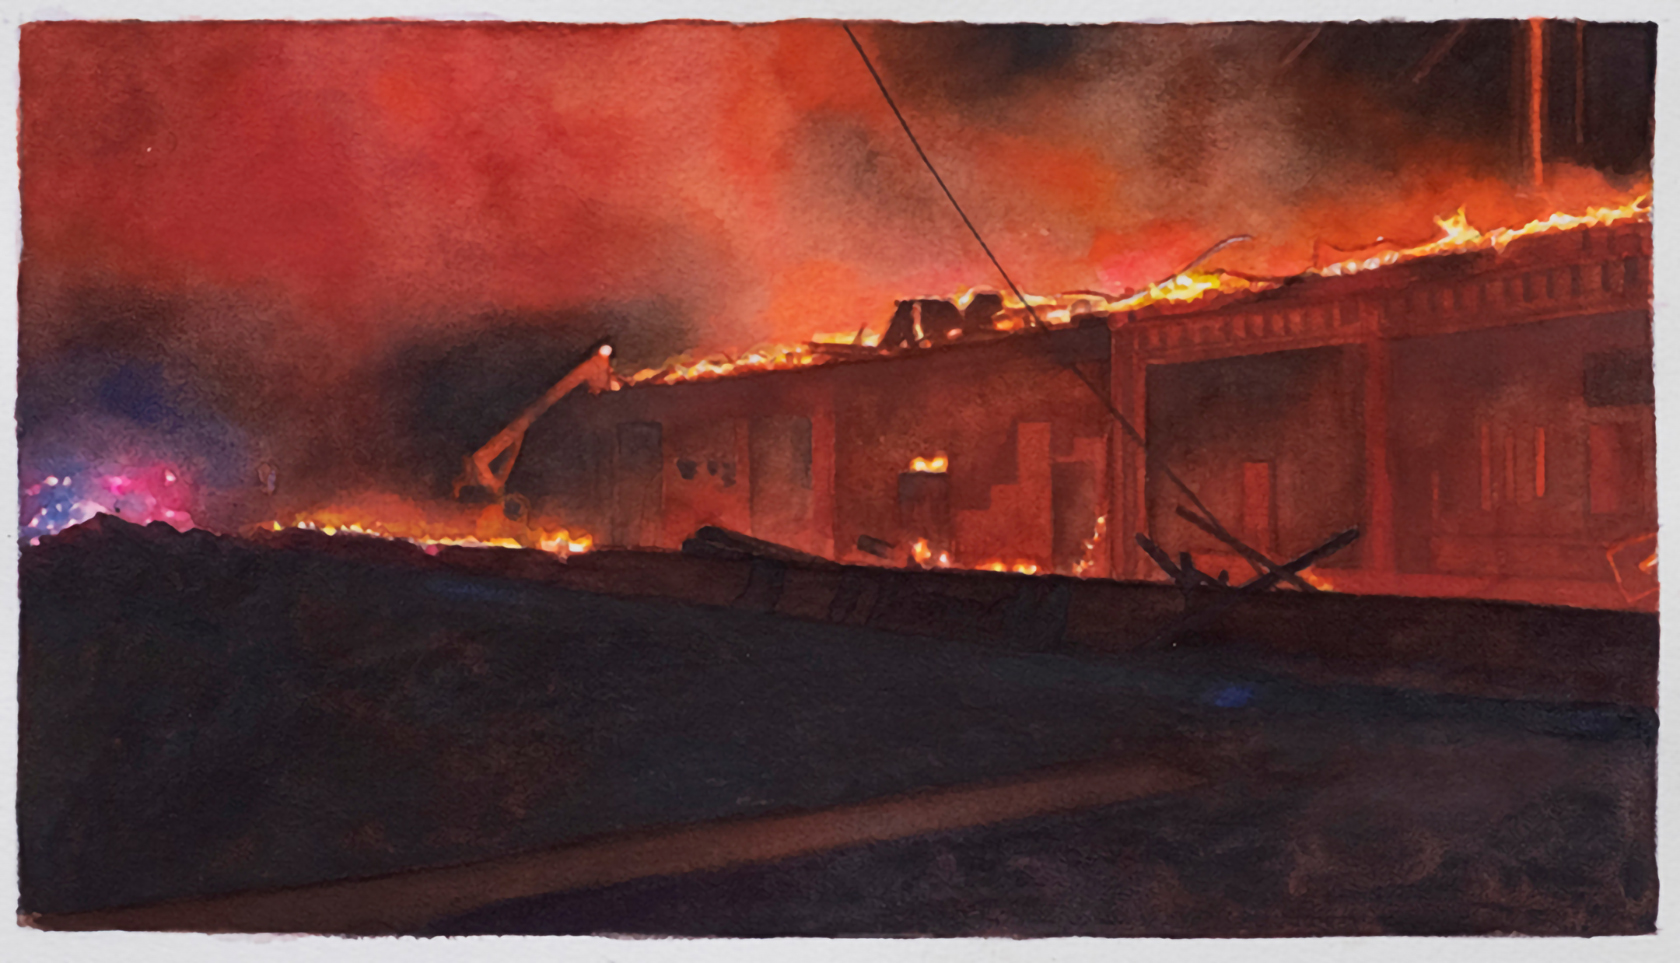 A structure on fire at night